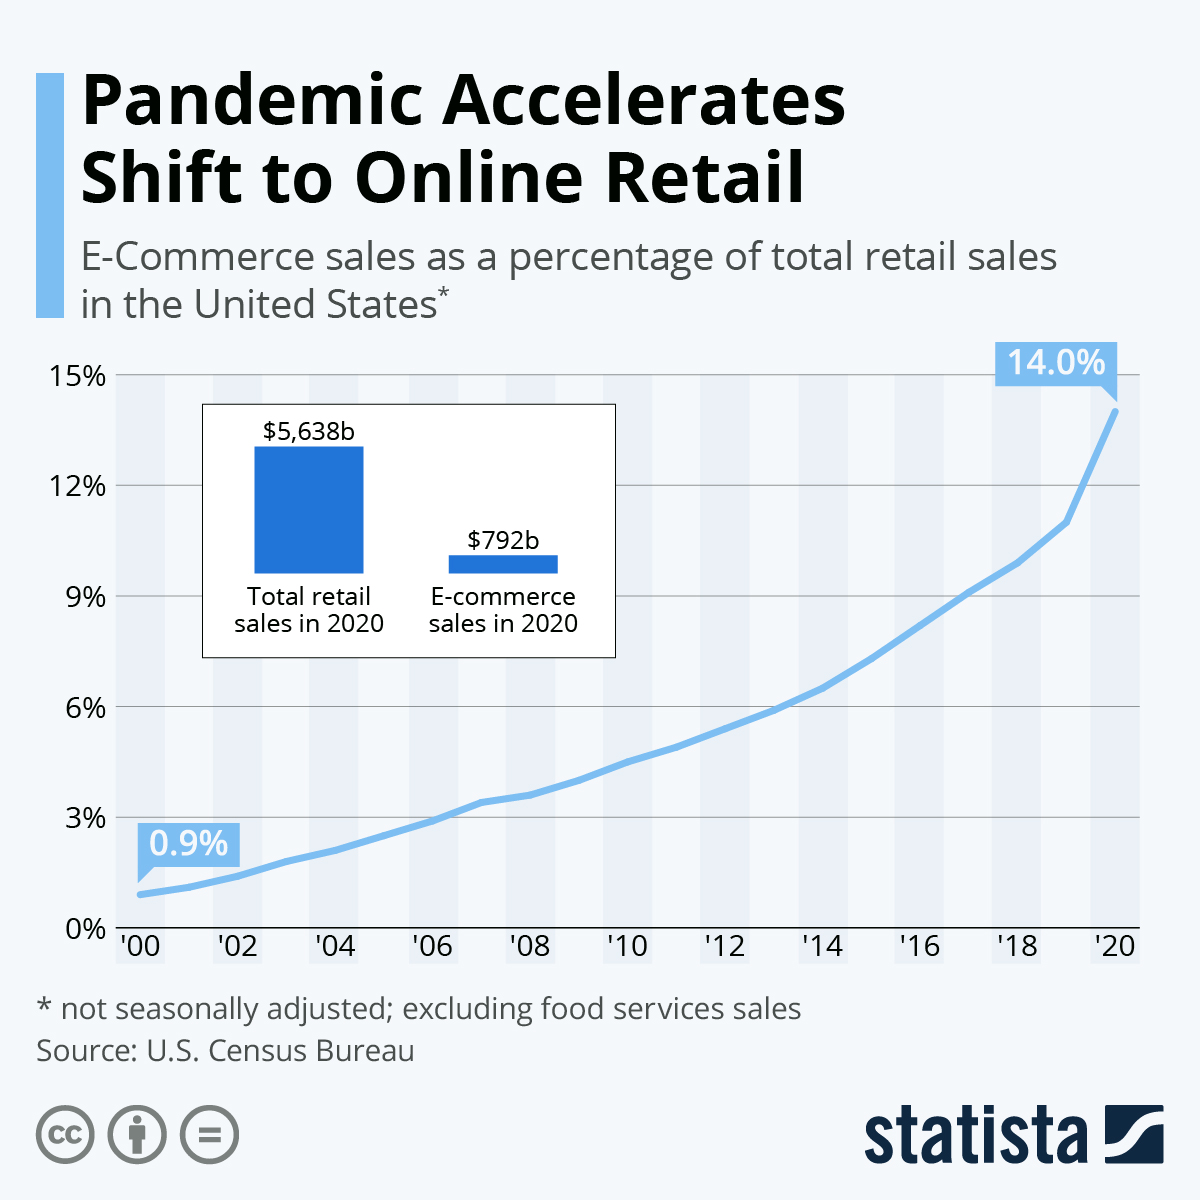 Pandemic Accelerates Shift to Online Retail